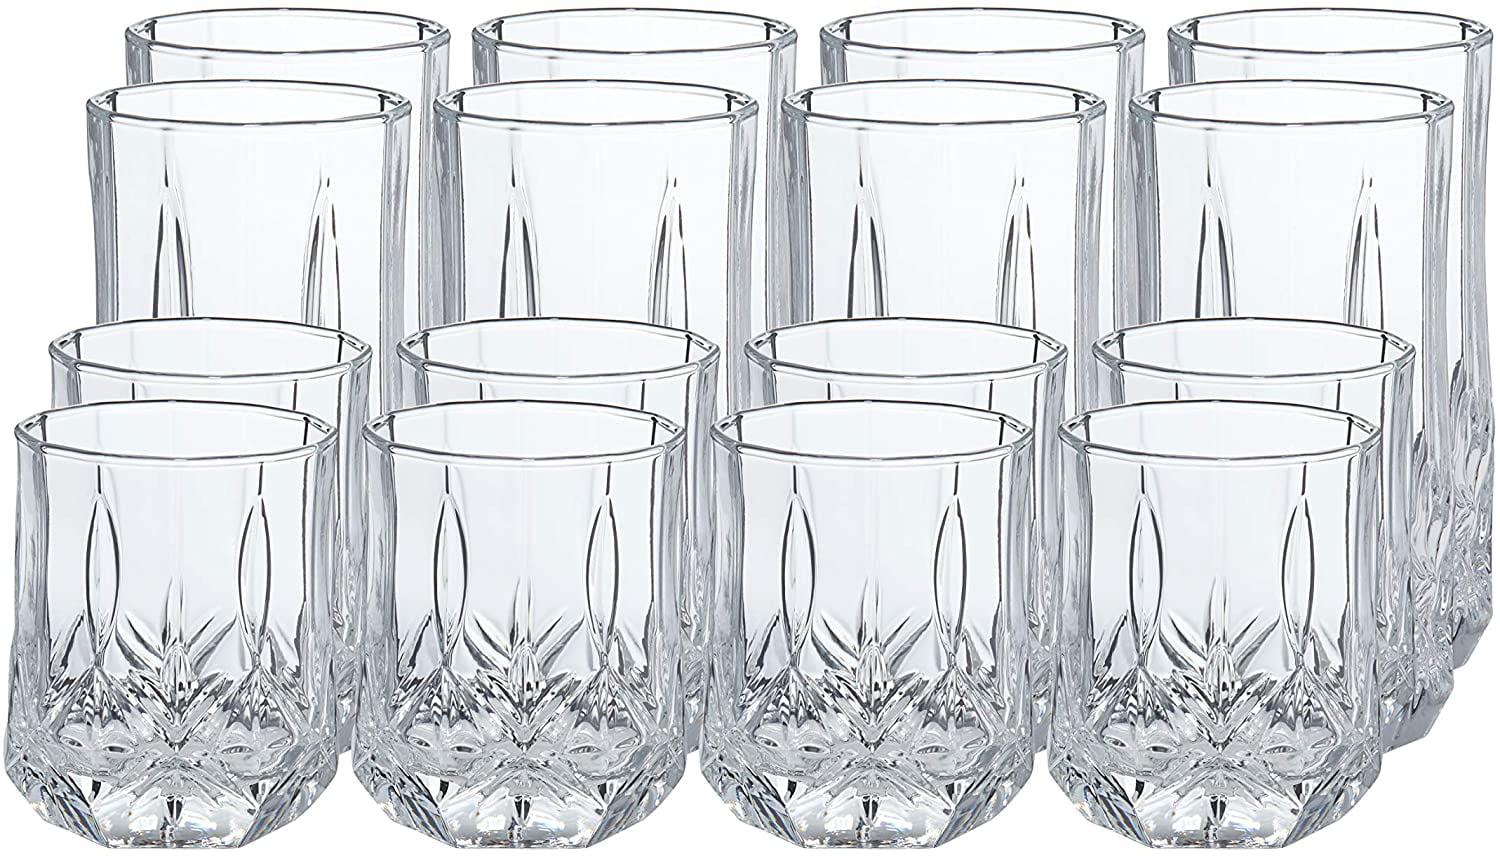 Basics Briercrest 16-Piece Old Fashioned and Coolers Glass Drinkware Set